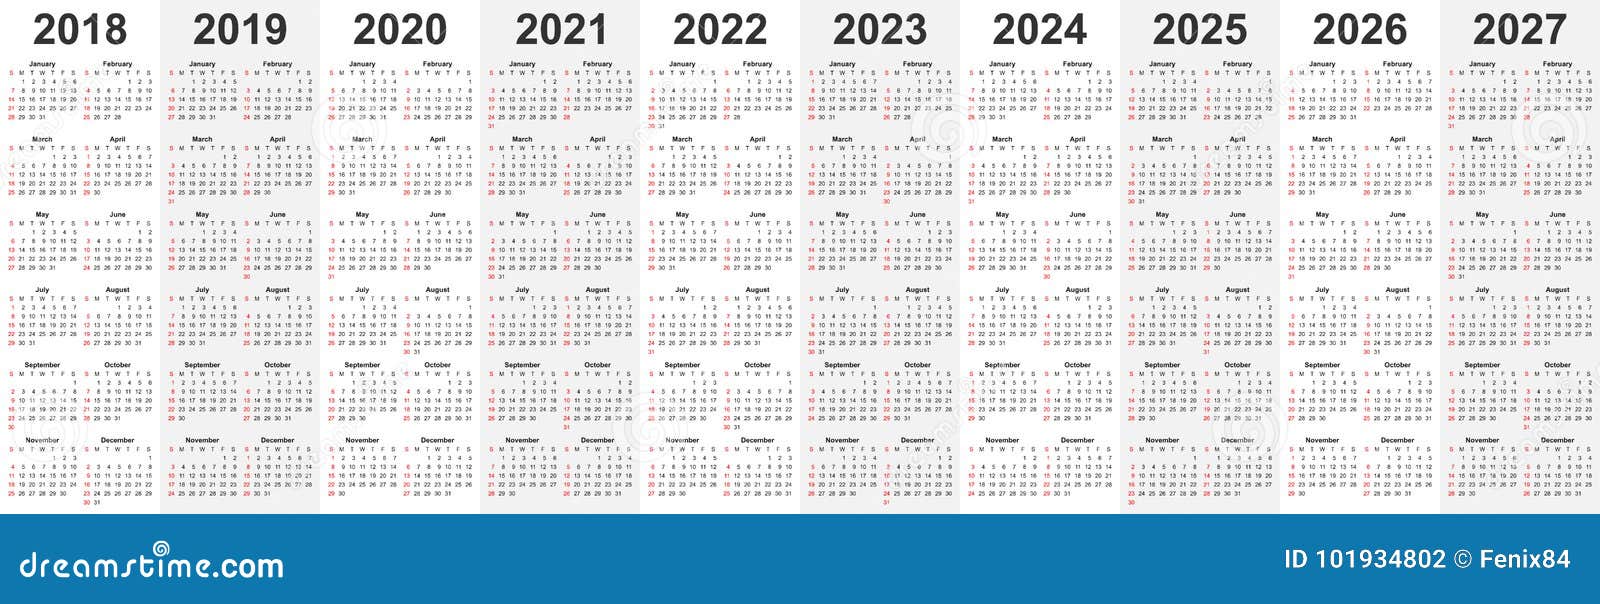 calendar-template-set-for-2018-2019-2020-2021-2022-2023-2024-2025-2026-and-2027-years